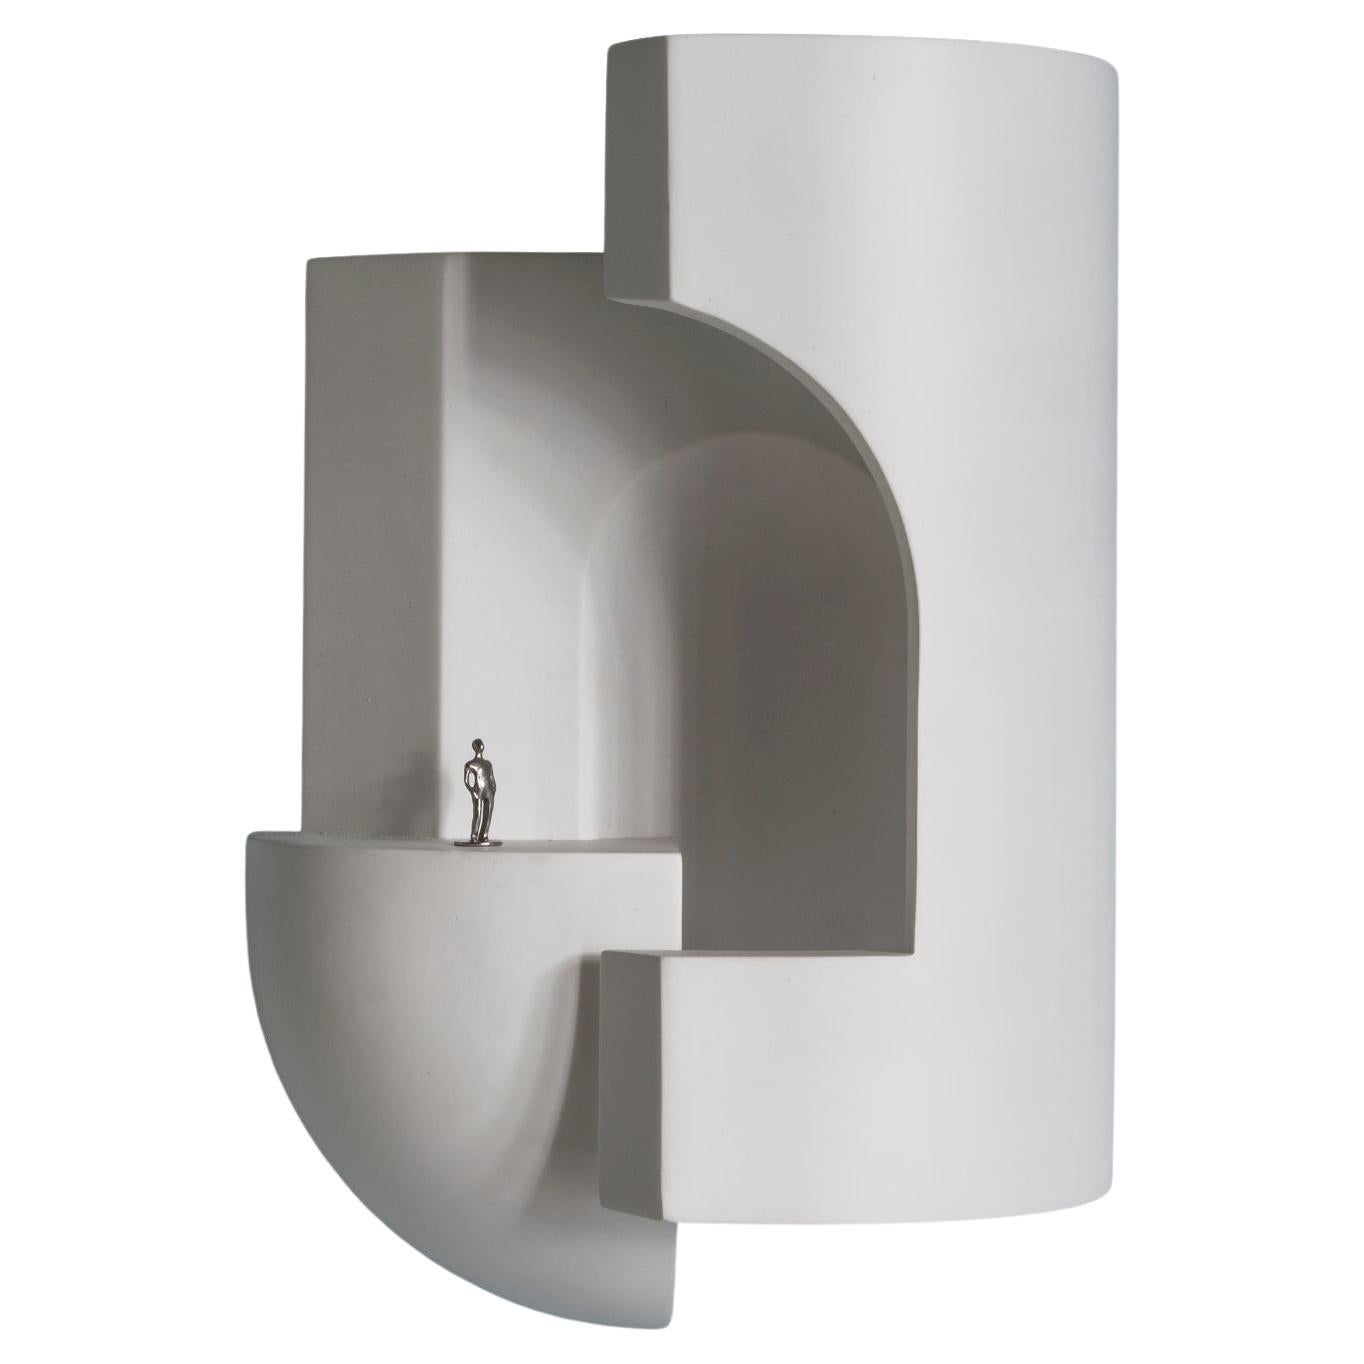 DCW Editions Soul Story 2 Wall Lamp in White Plaster by Charles Kalpakian